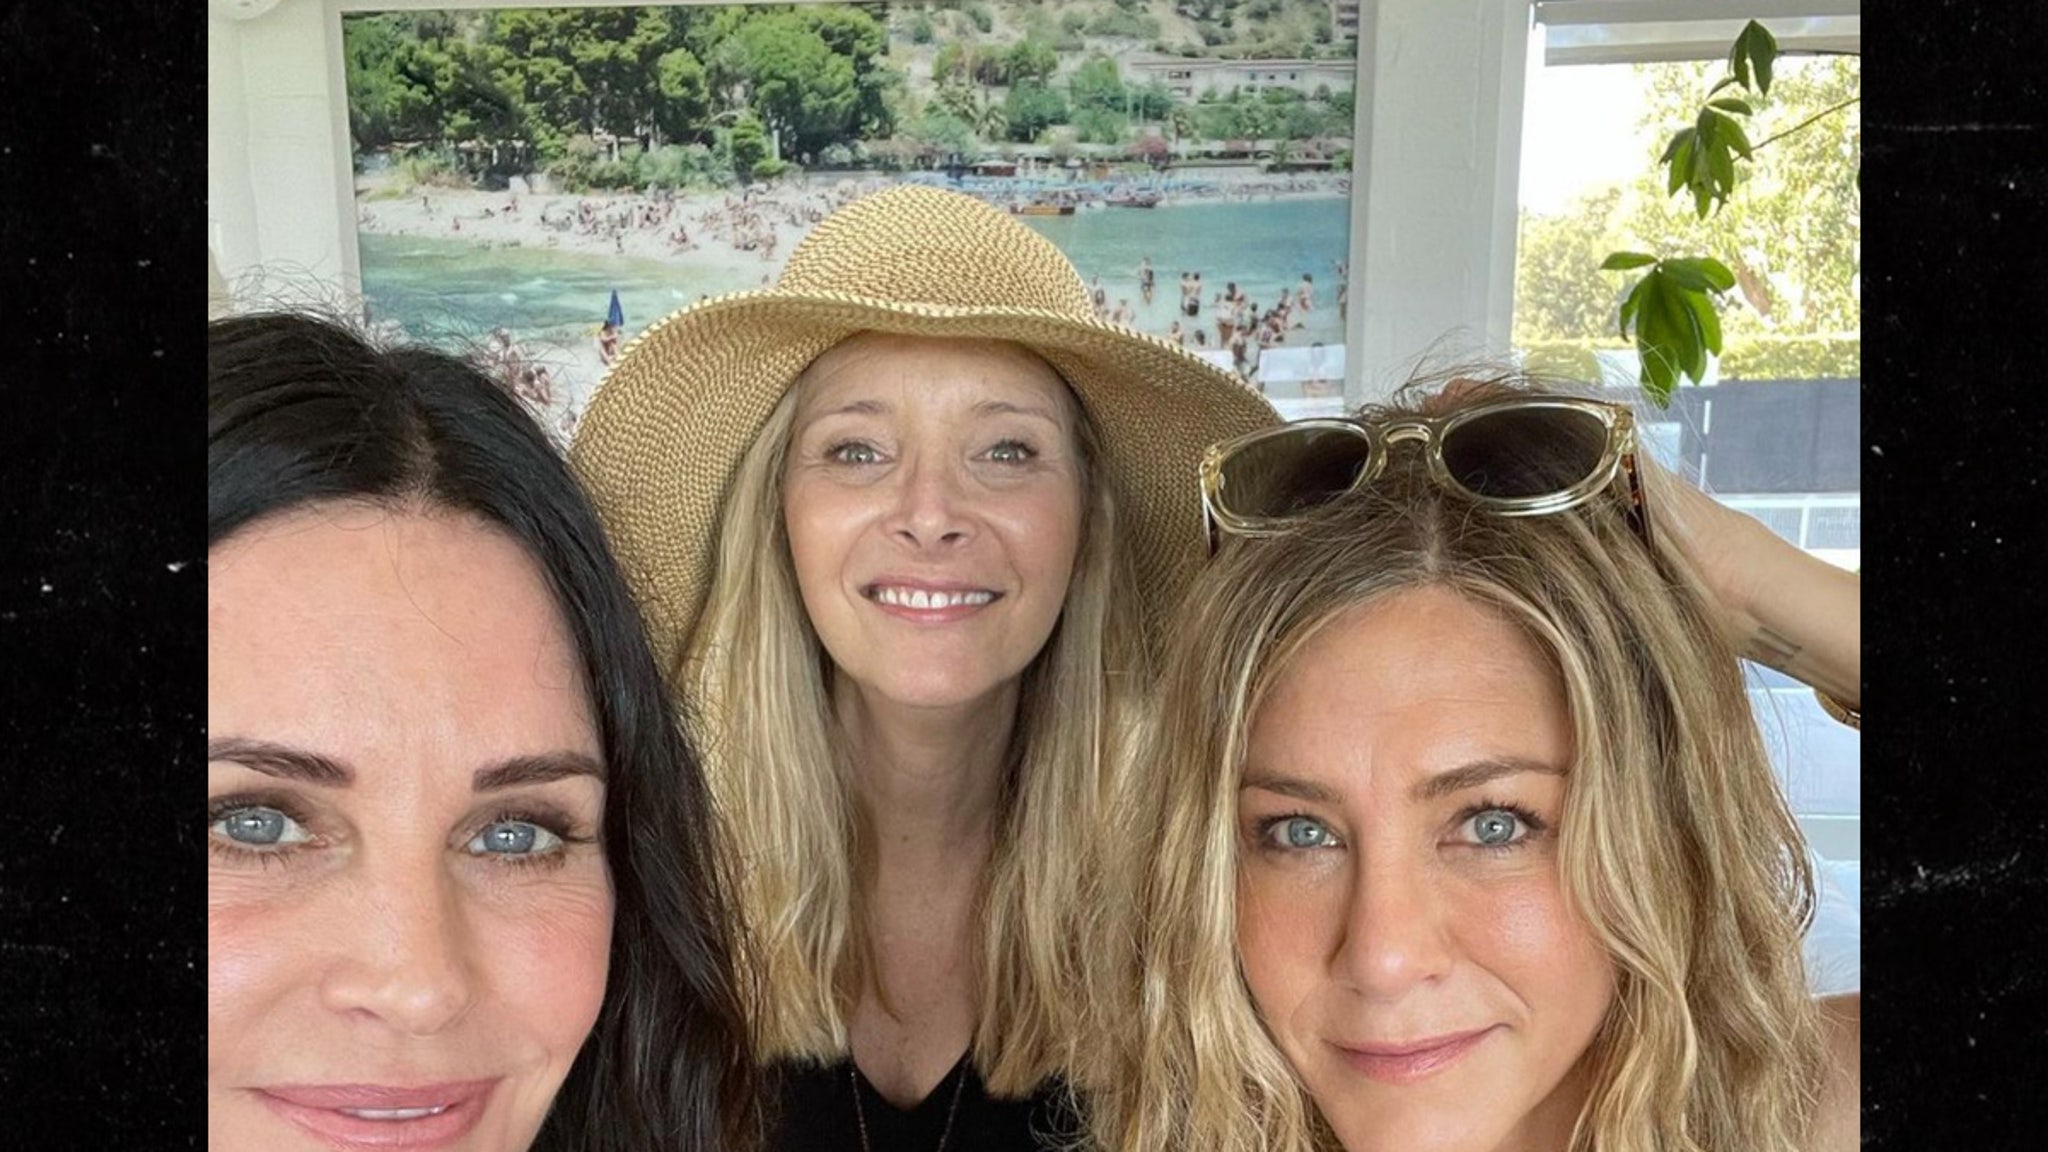 'Friends' Courteney Cox, Jen Aniston, Lisa Kudrow Spend 4th of July Together